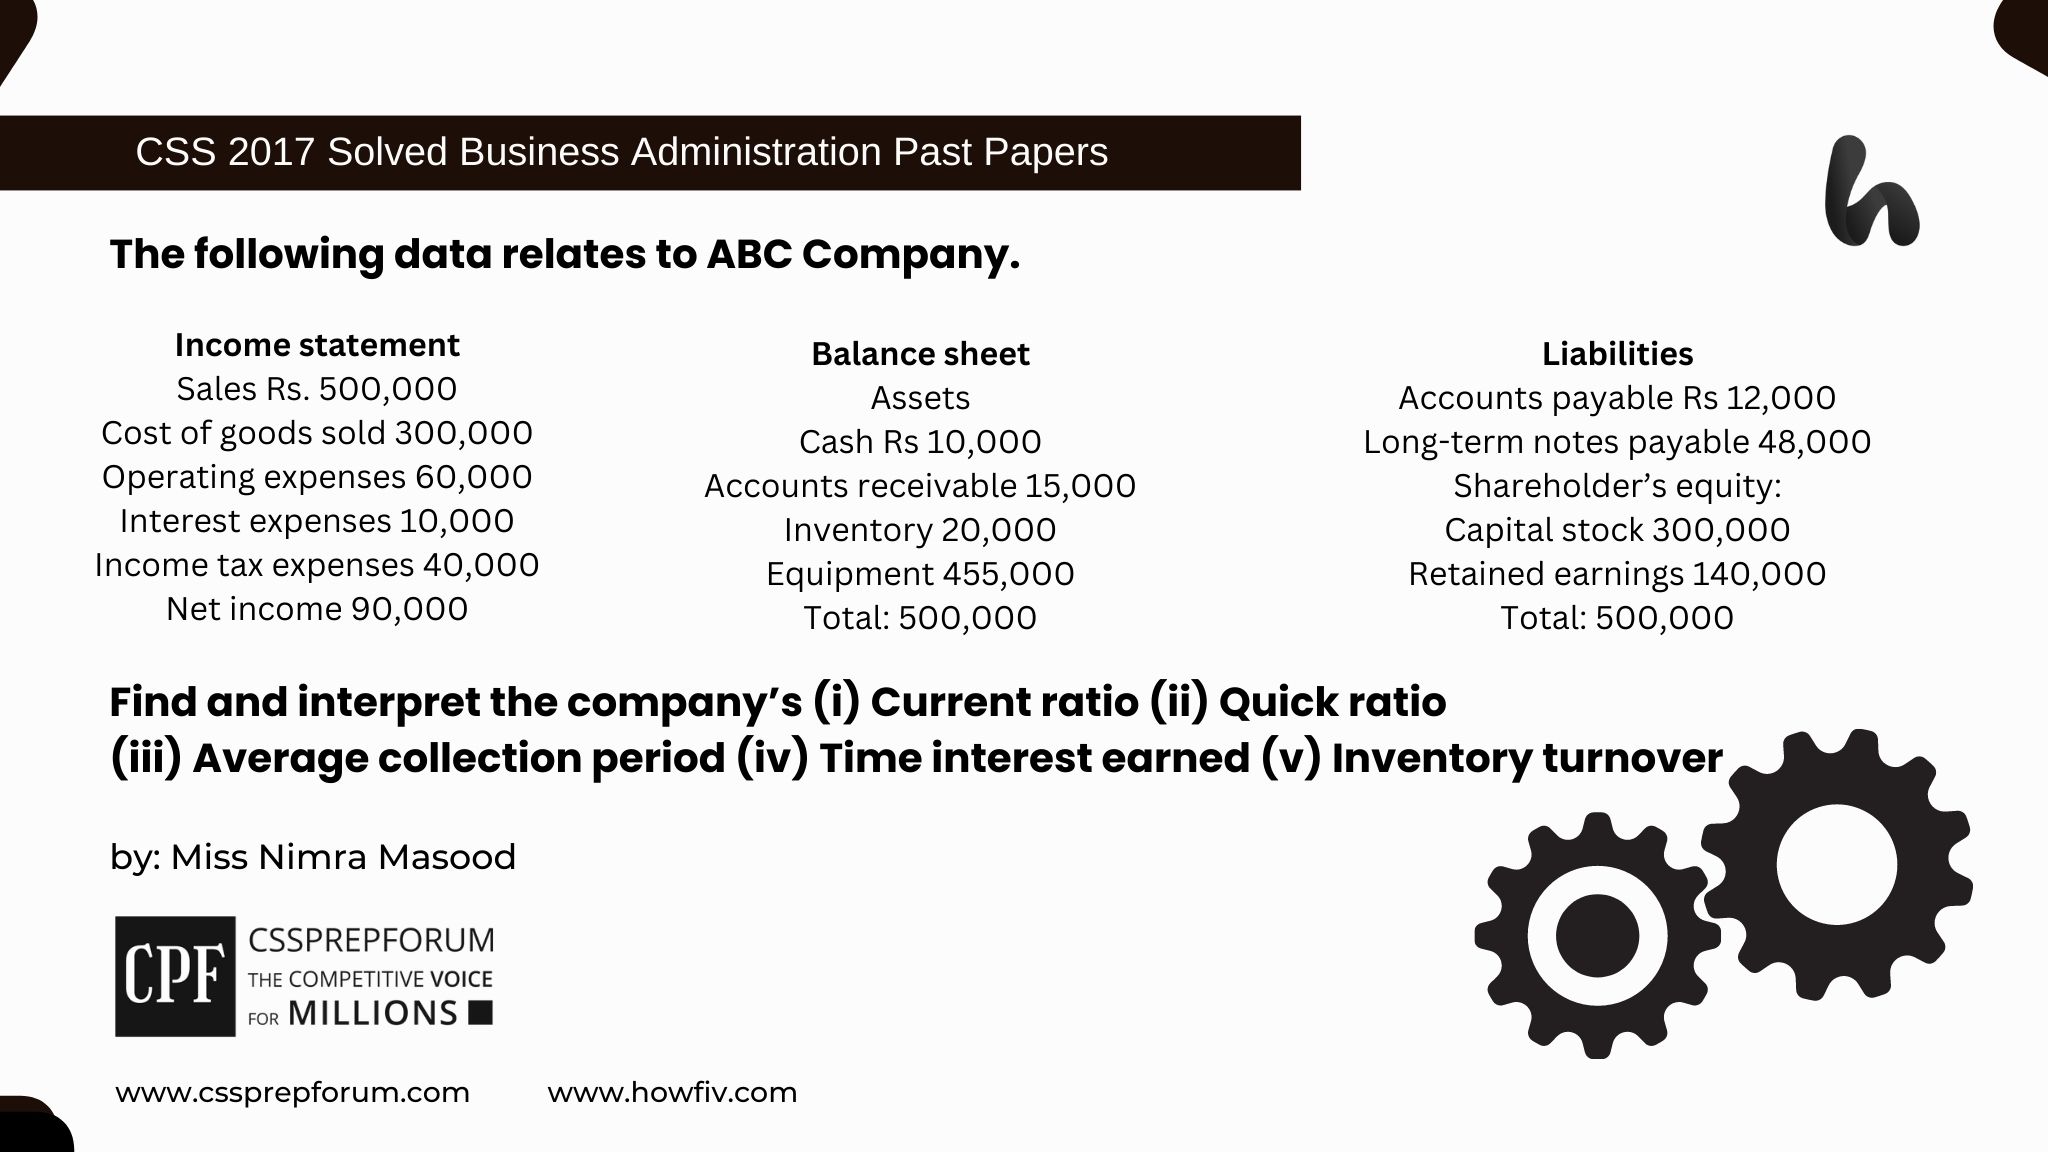 The following data relates to ABC Company.